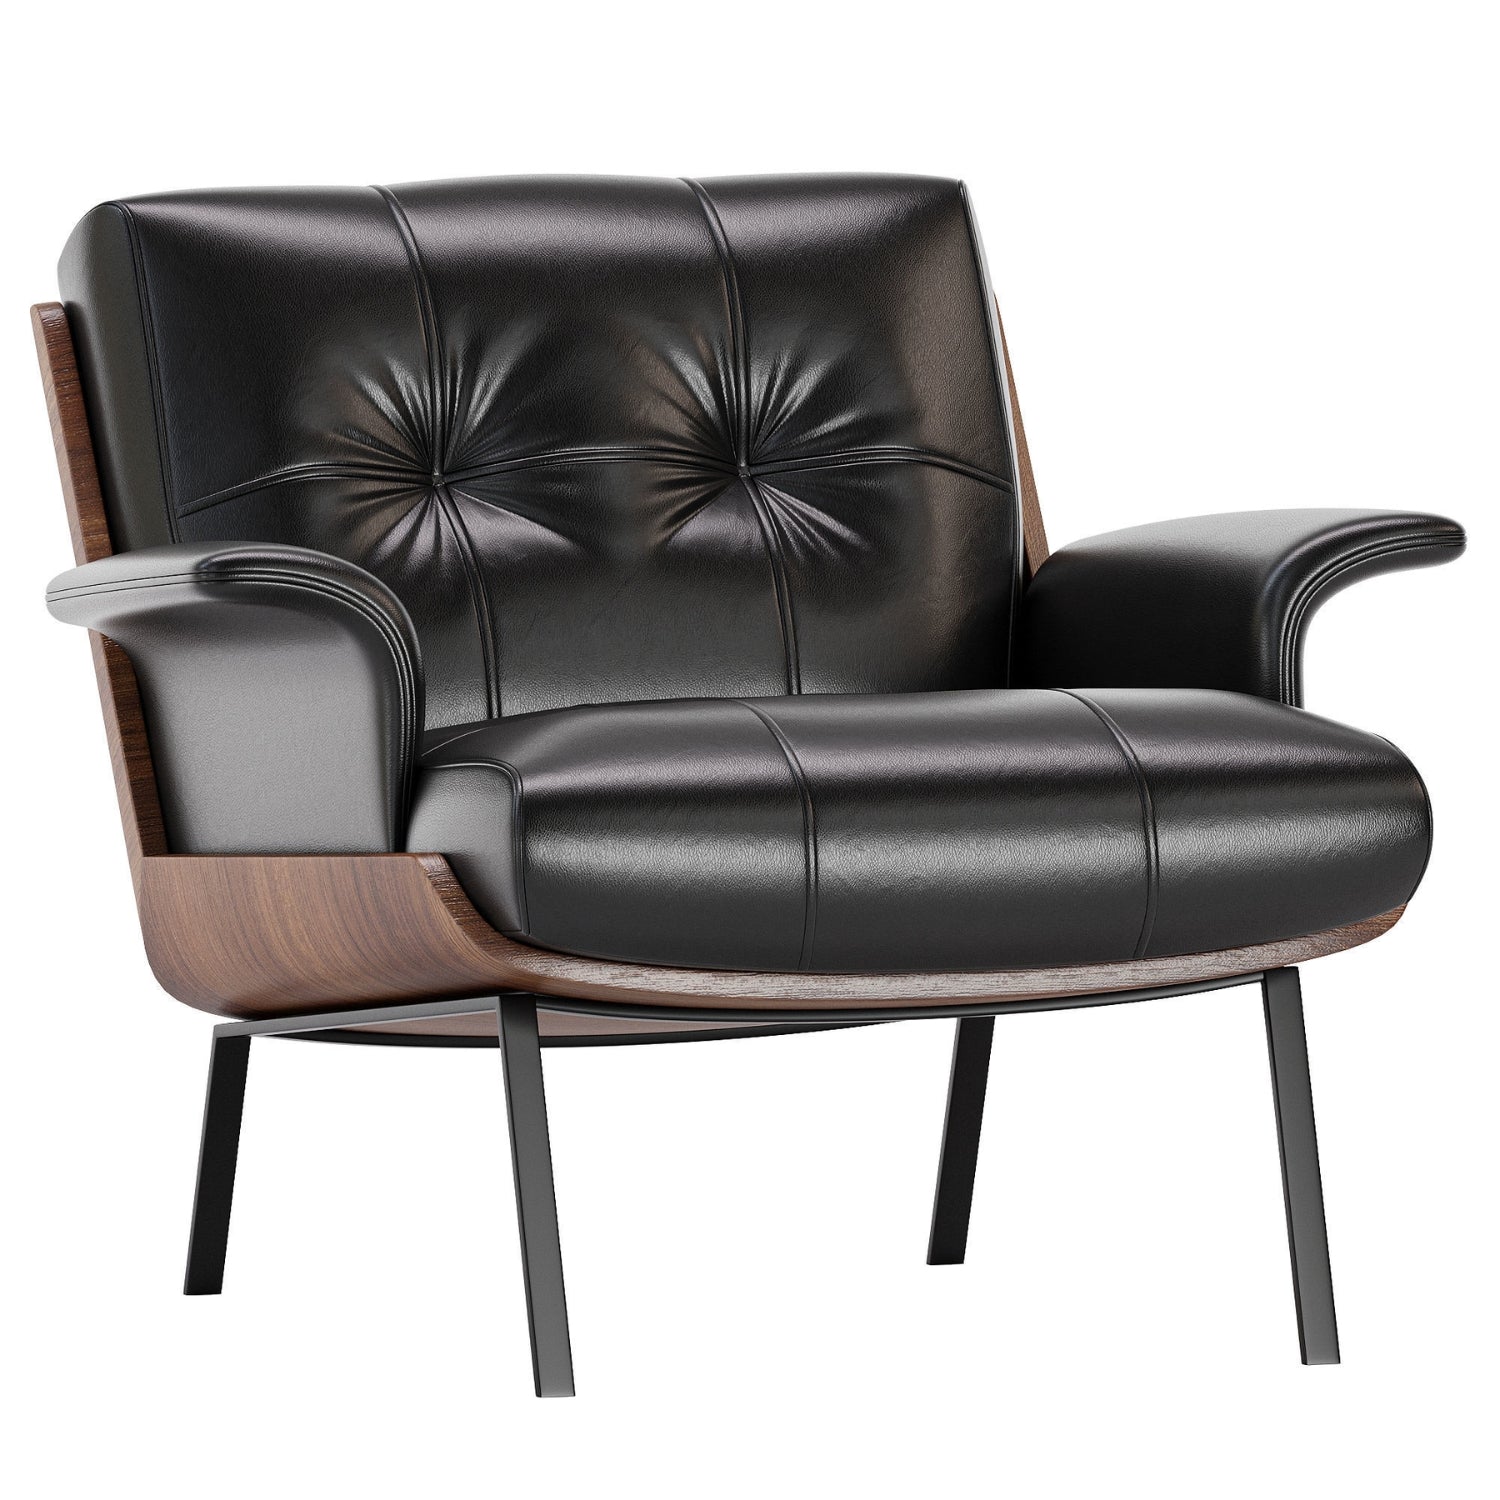 An exquisite Replica Daiki black leather lounge armchair featuring stylish wooden legs, offering both comfort and a touch of class.